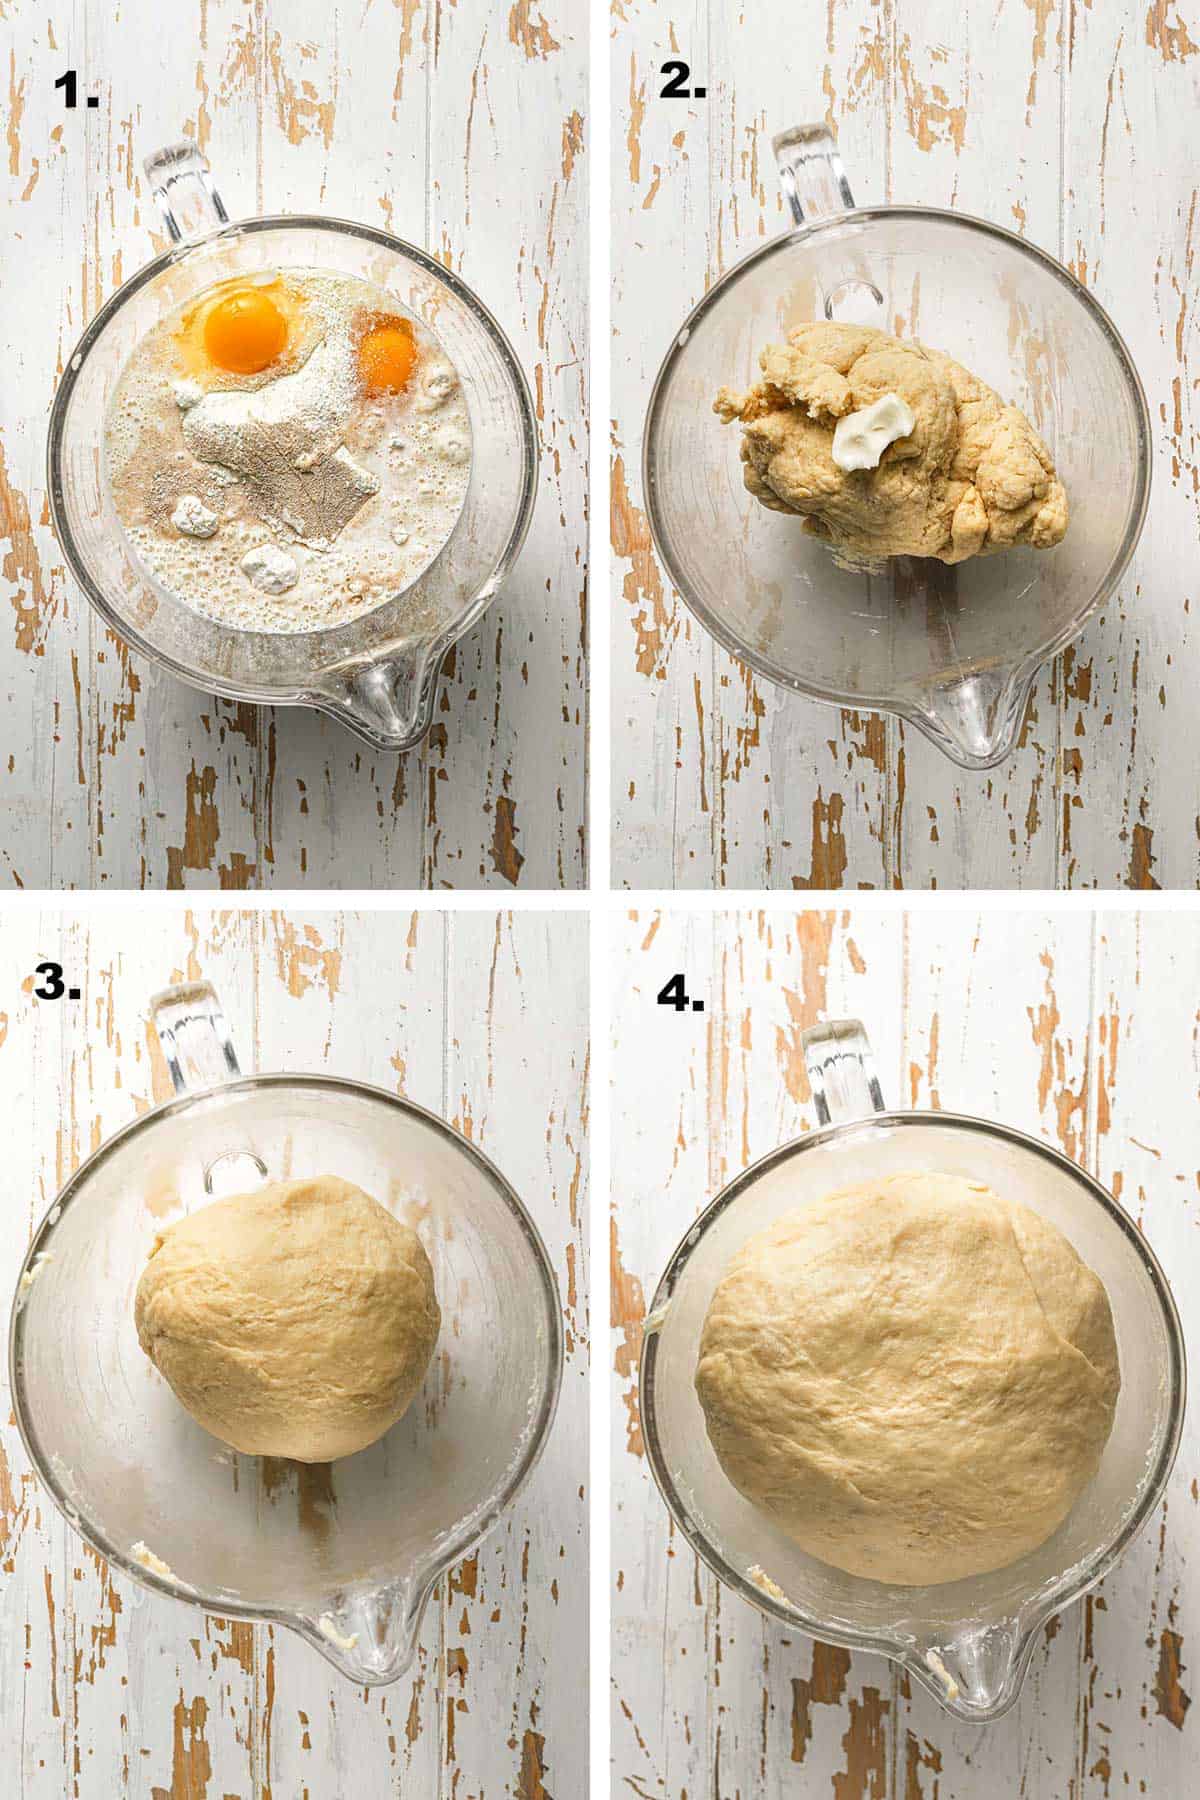 Steps to make dinner buns, placing the ingredients in a bowl, adding butter, dough after rest.